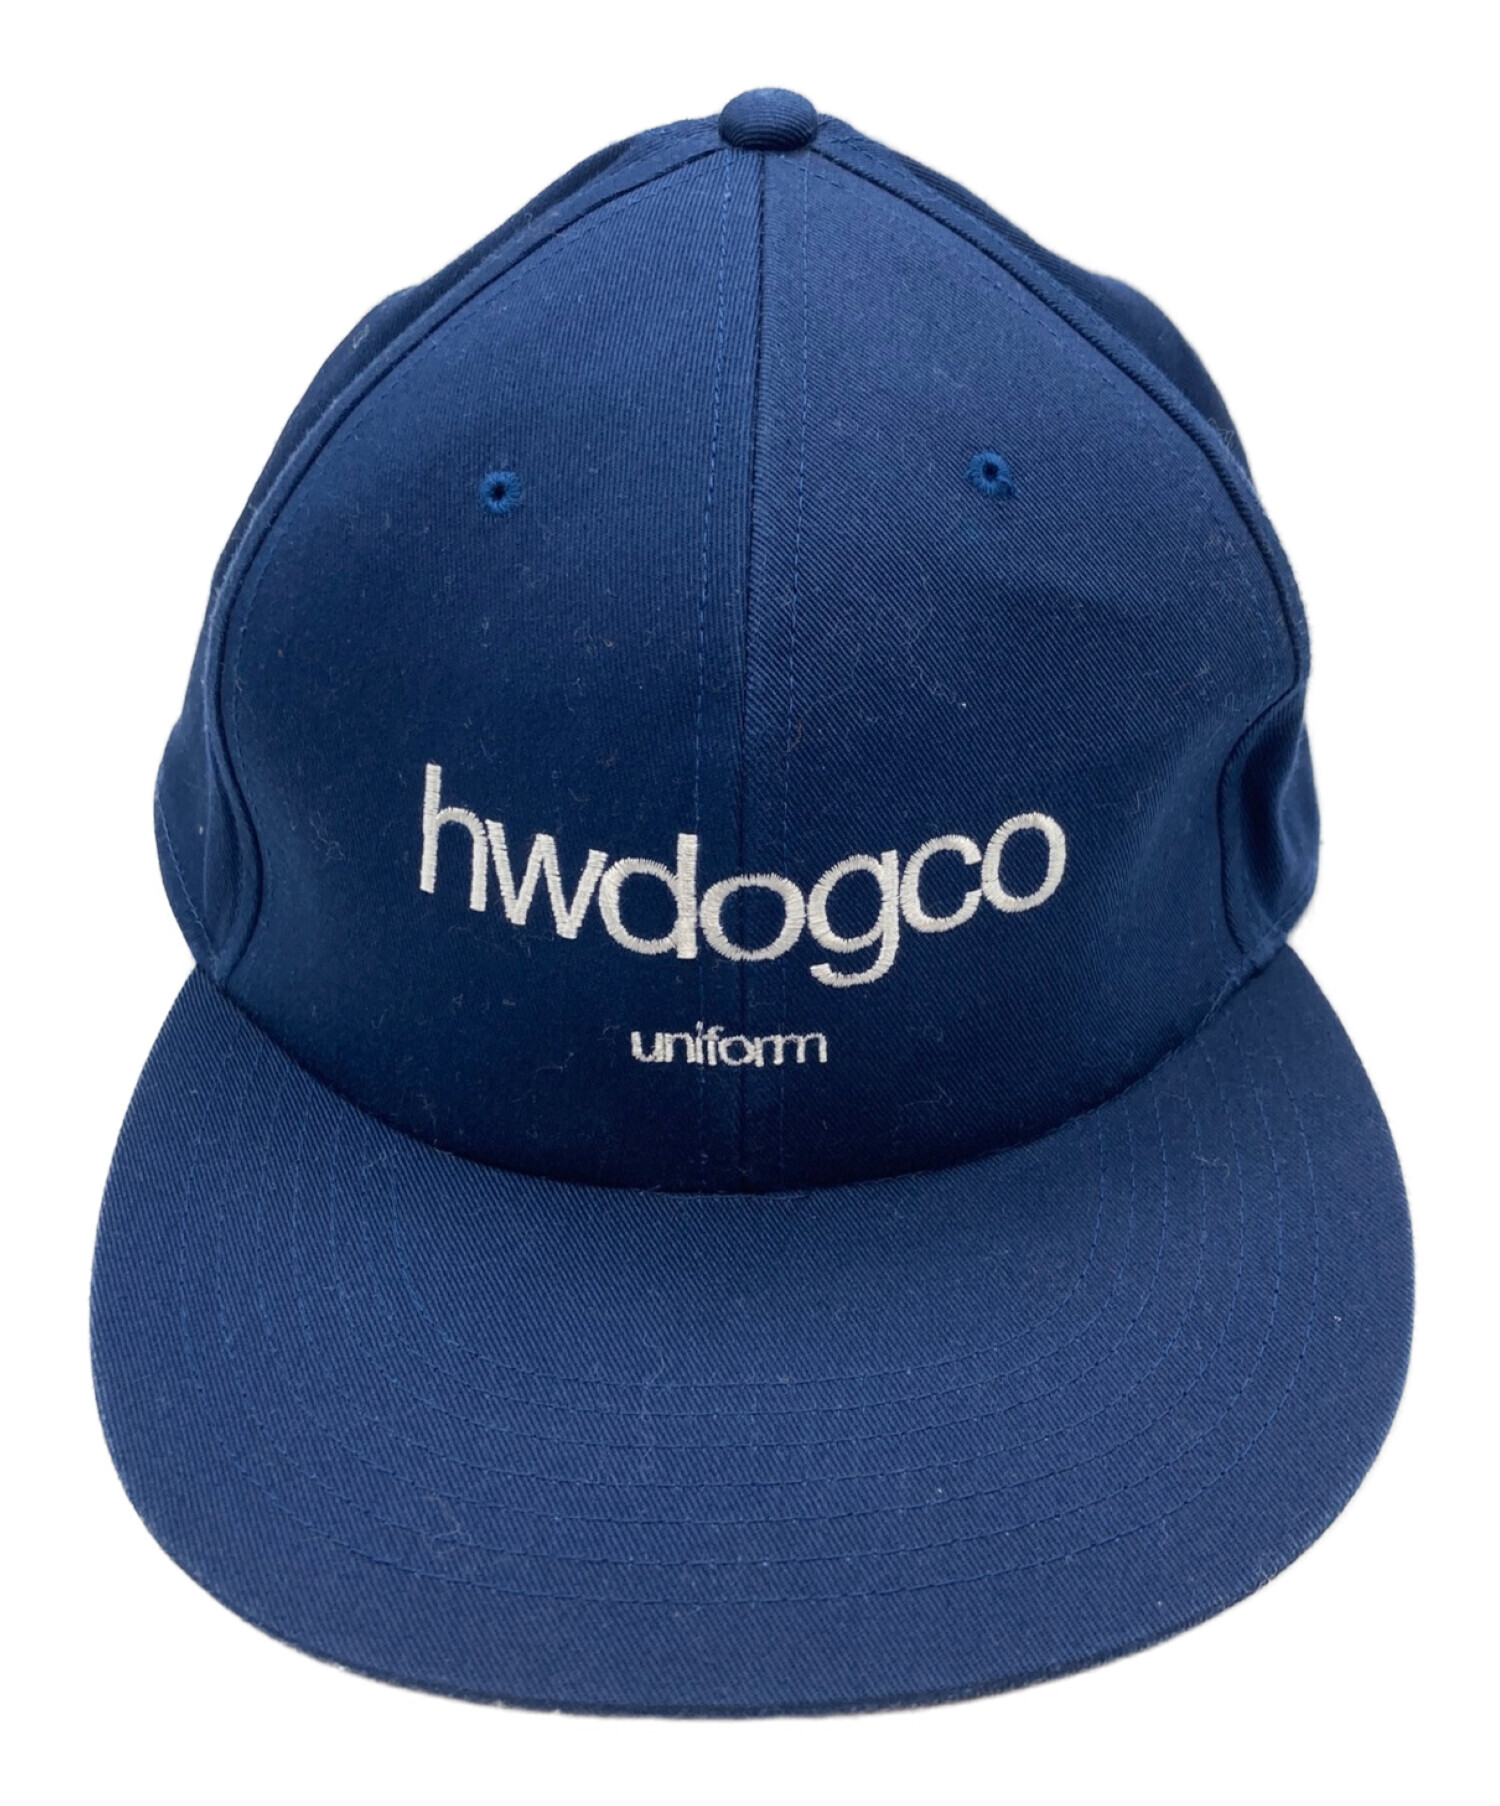 THE H.W.DOG\u0026CO キャップ　38